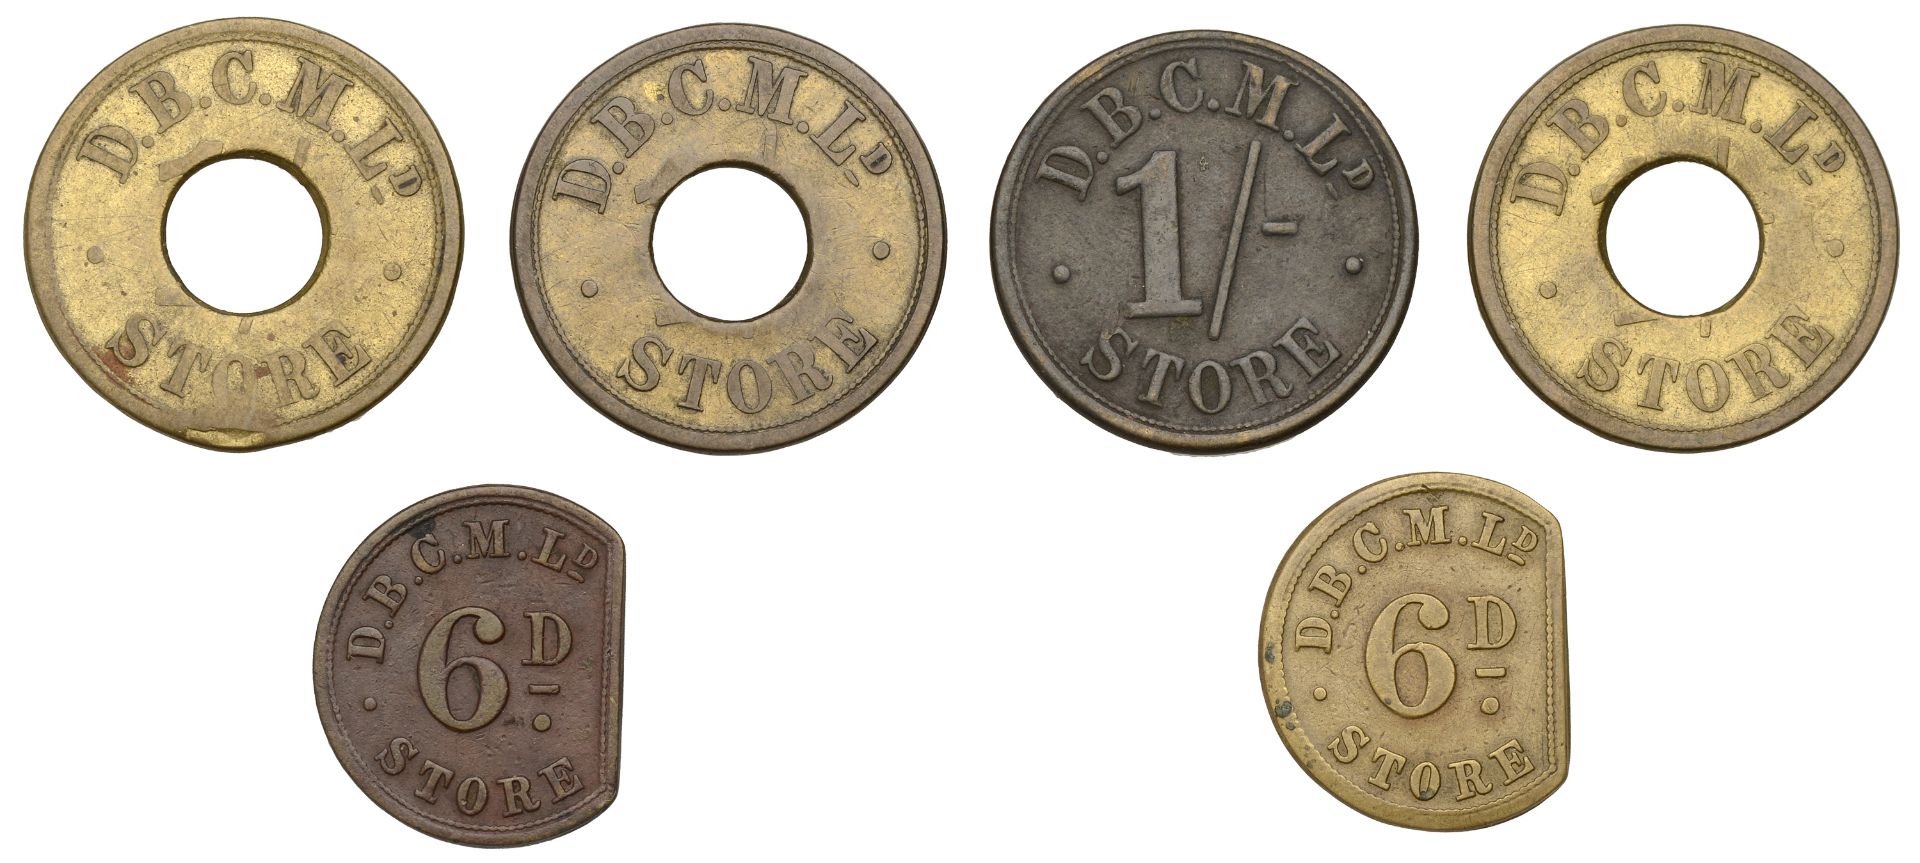 South Africa, CAPE PROVINCE, Kimberley, De Beers Consolidated Mines Ltd, brass Shillings (4)...